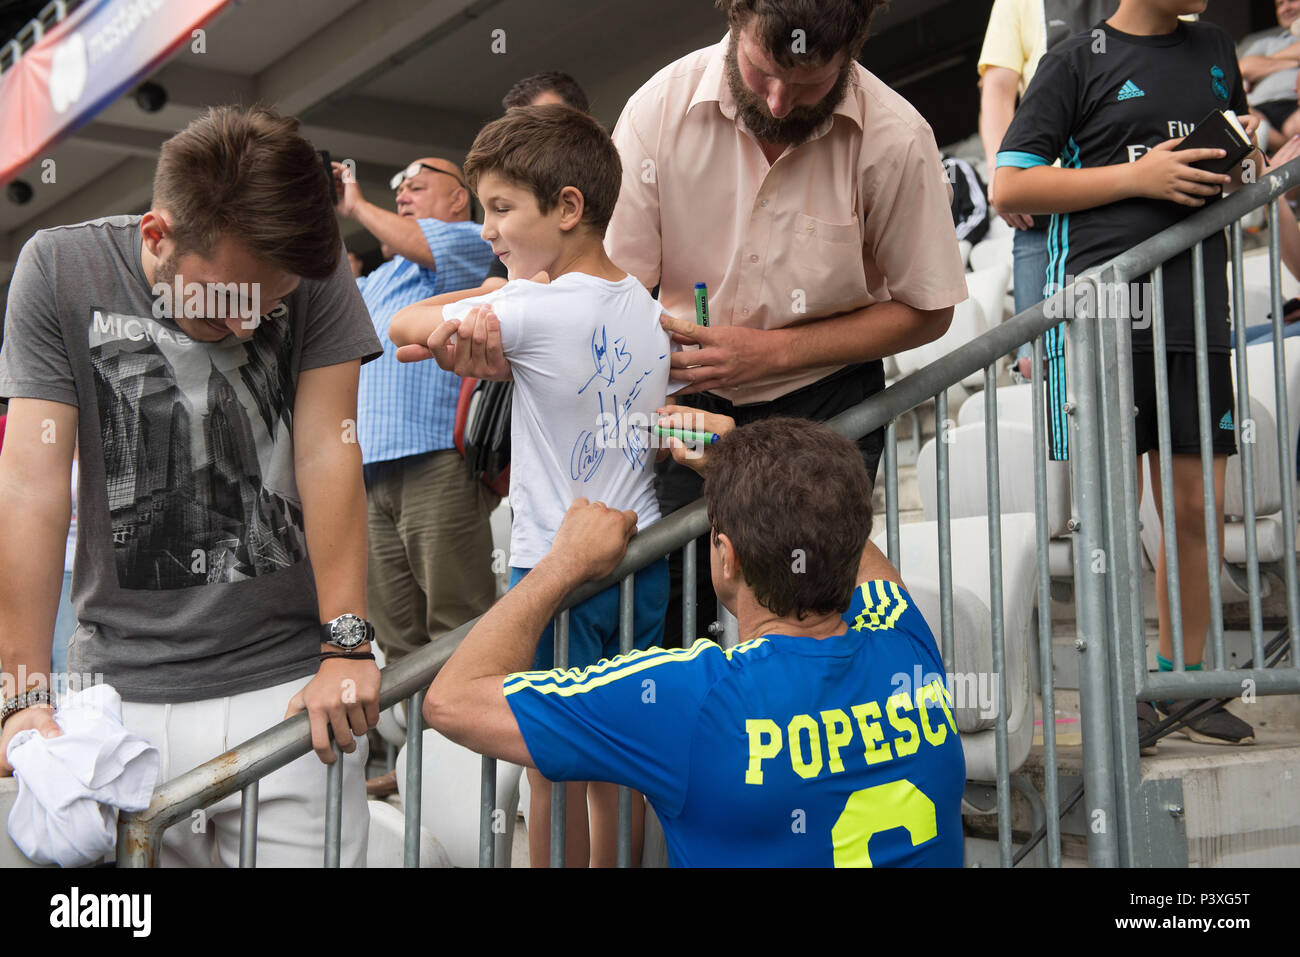 CLUJ NAPOCA, ROMANIA - JUNE 15, 2018: Romanian football player Gheorghe Popescu from the Golden Team signing autographs during a match against Barcelo Stock Photo